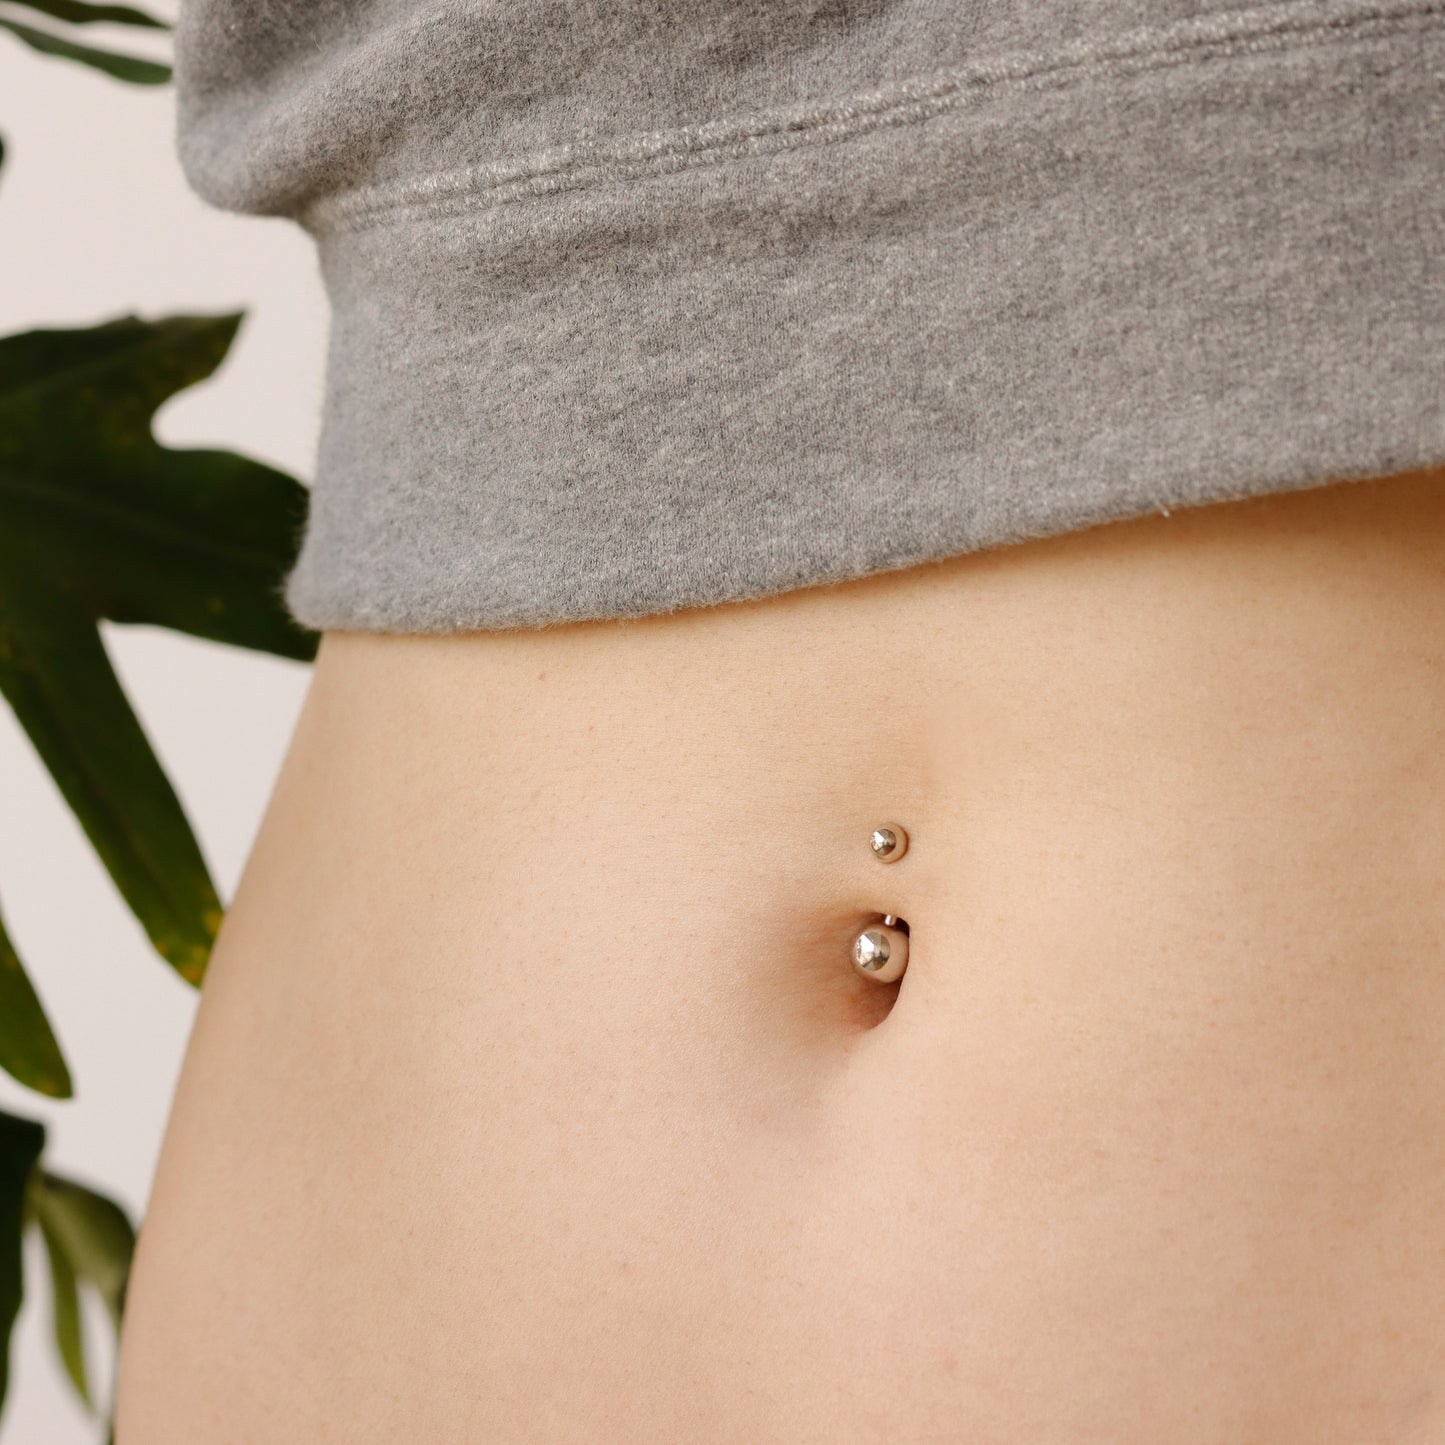 Solid 925 Silver | 16G/14G Classic Ball Combination Belly Ring | 6mm 1/4" 8mm 5/16" 10mm 3/8" - Sturdy South